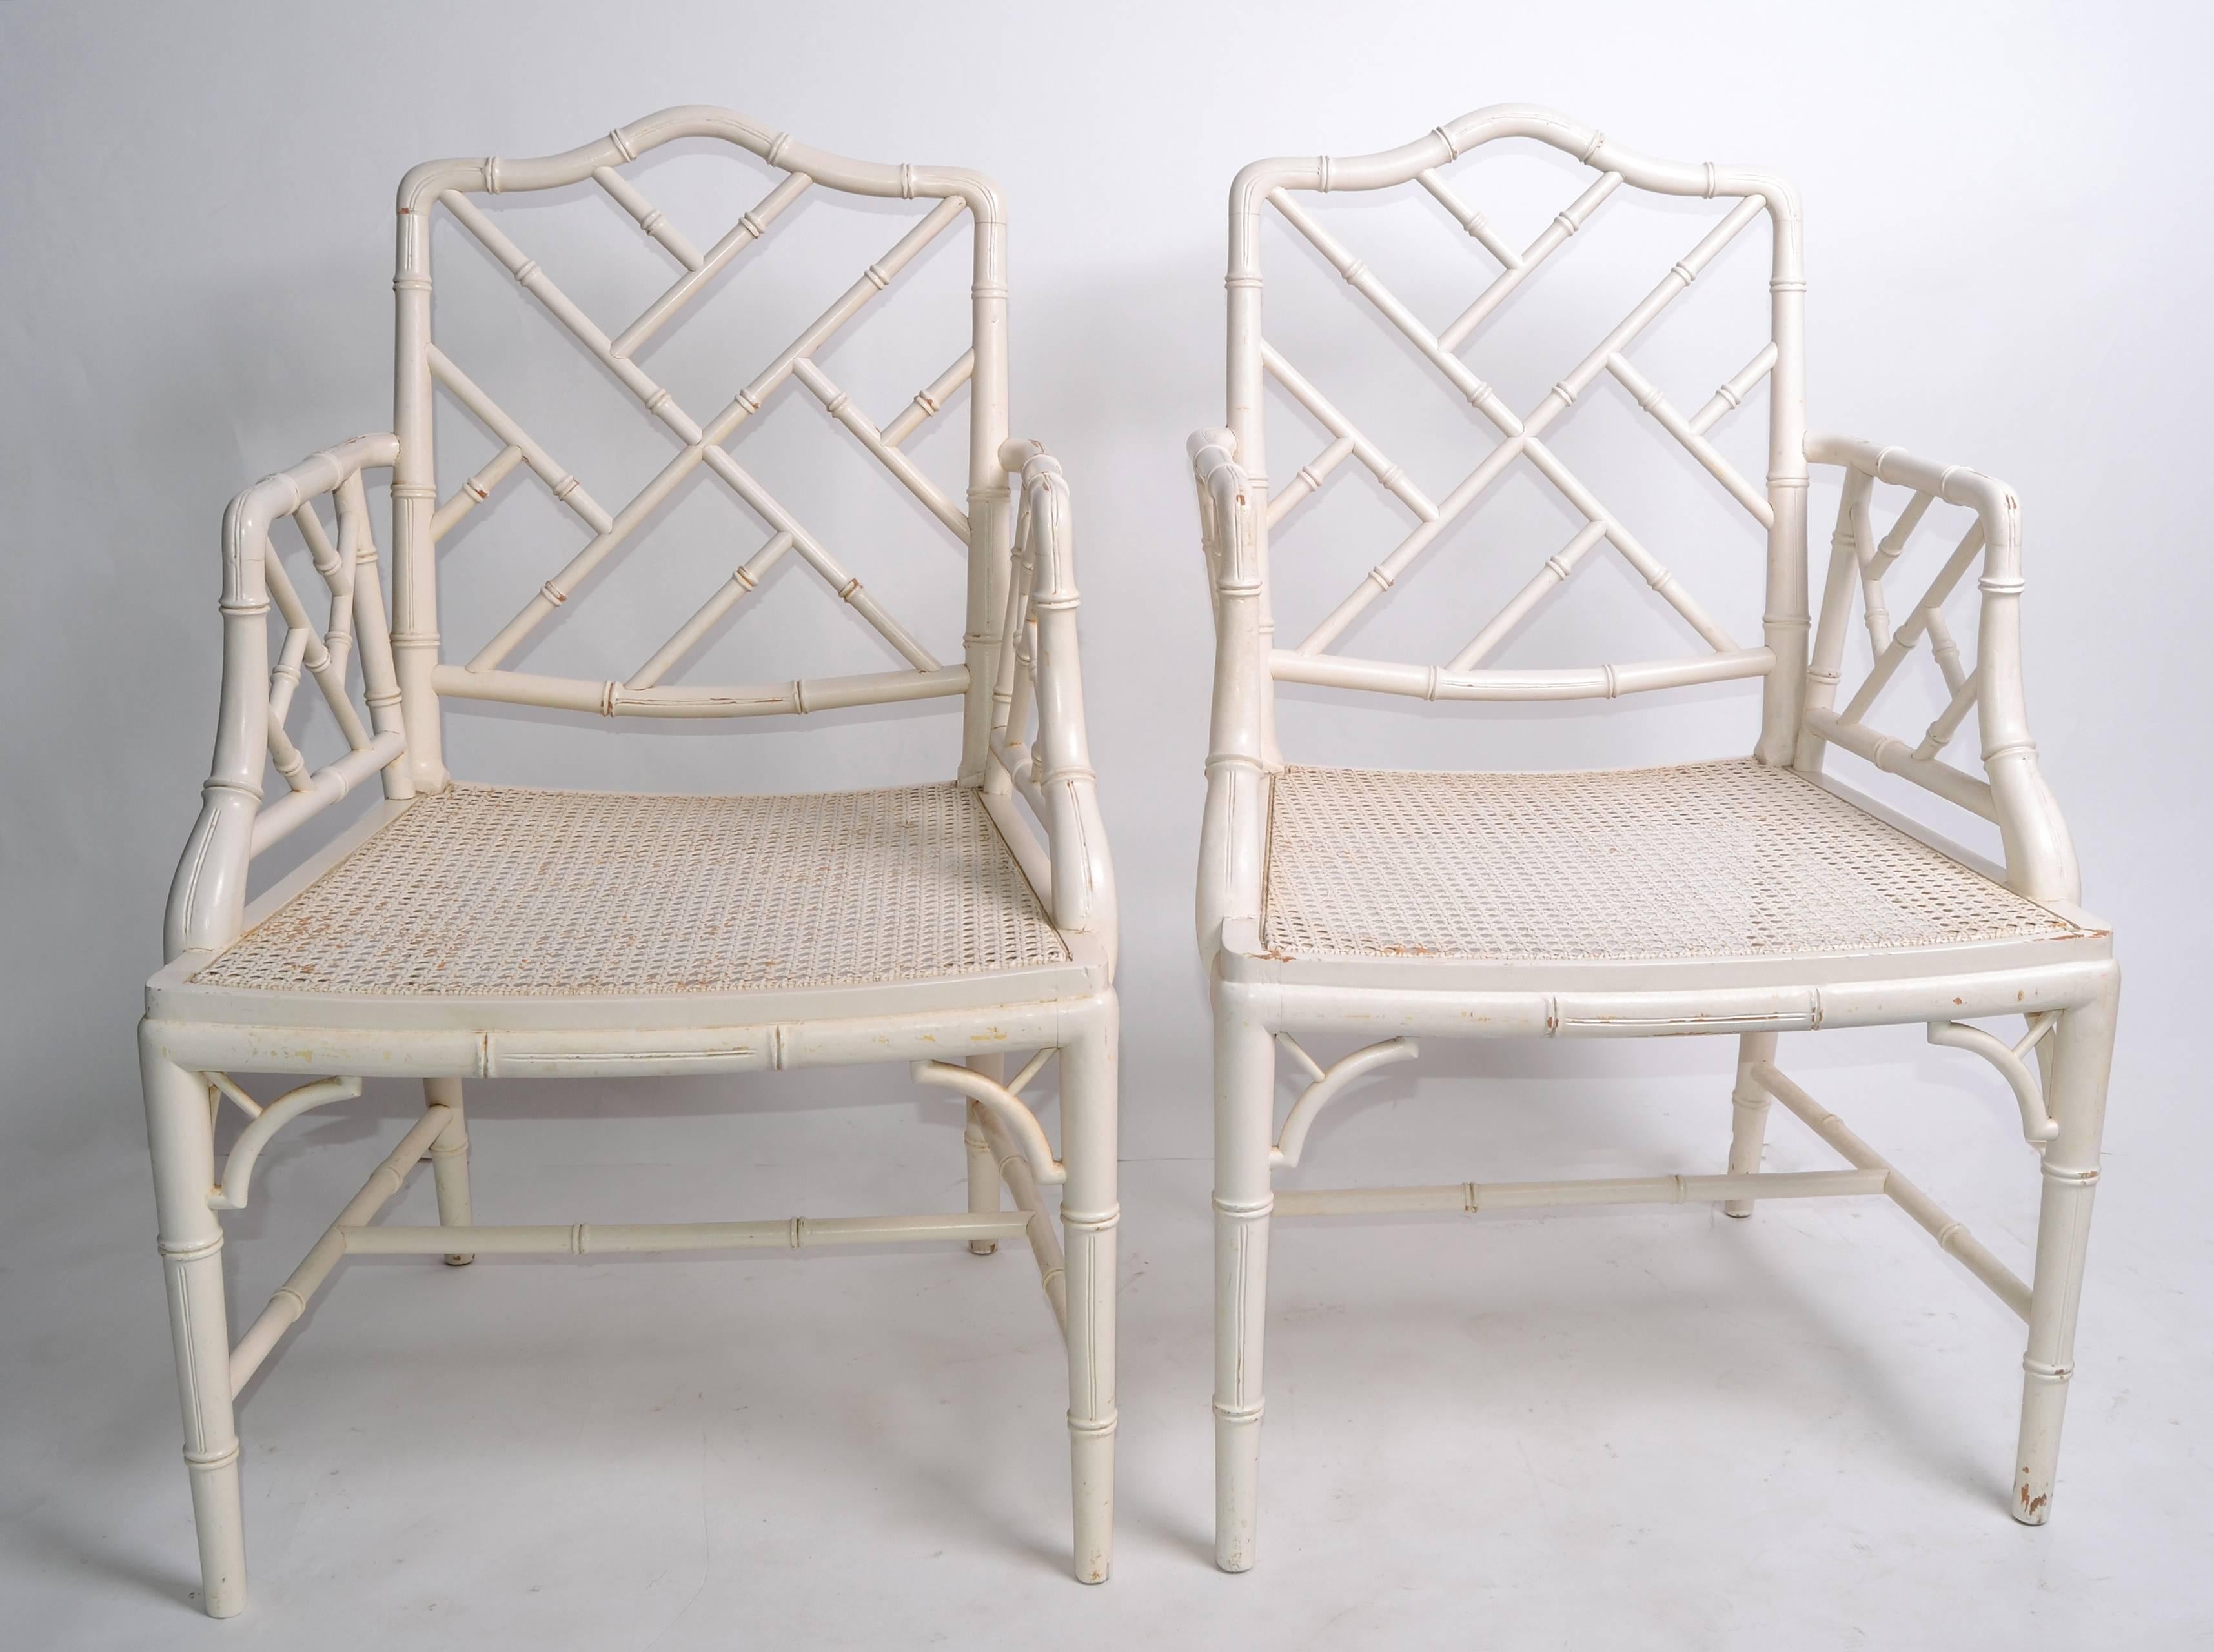 A pair of Hollywood Regency faux bamboo Chippendale armchairs.
Distressed paint.
No makers mark.

Seat height: 16 inches
Arm height: 26.63 inches.